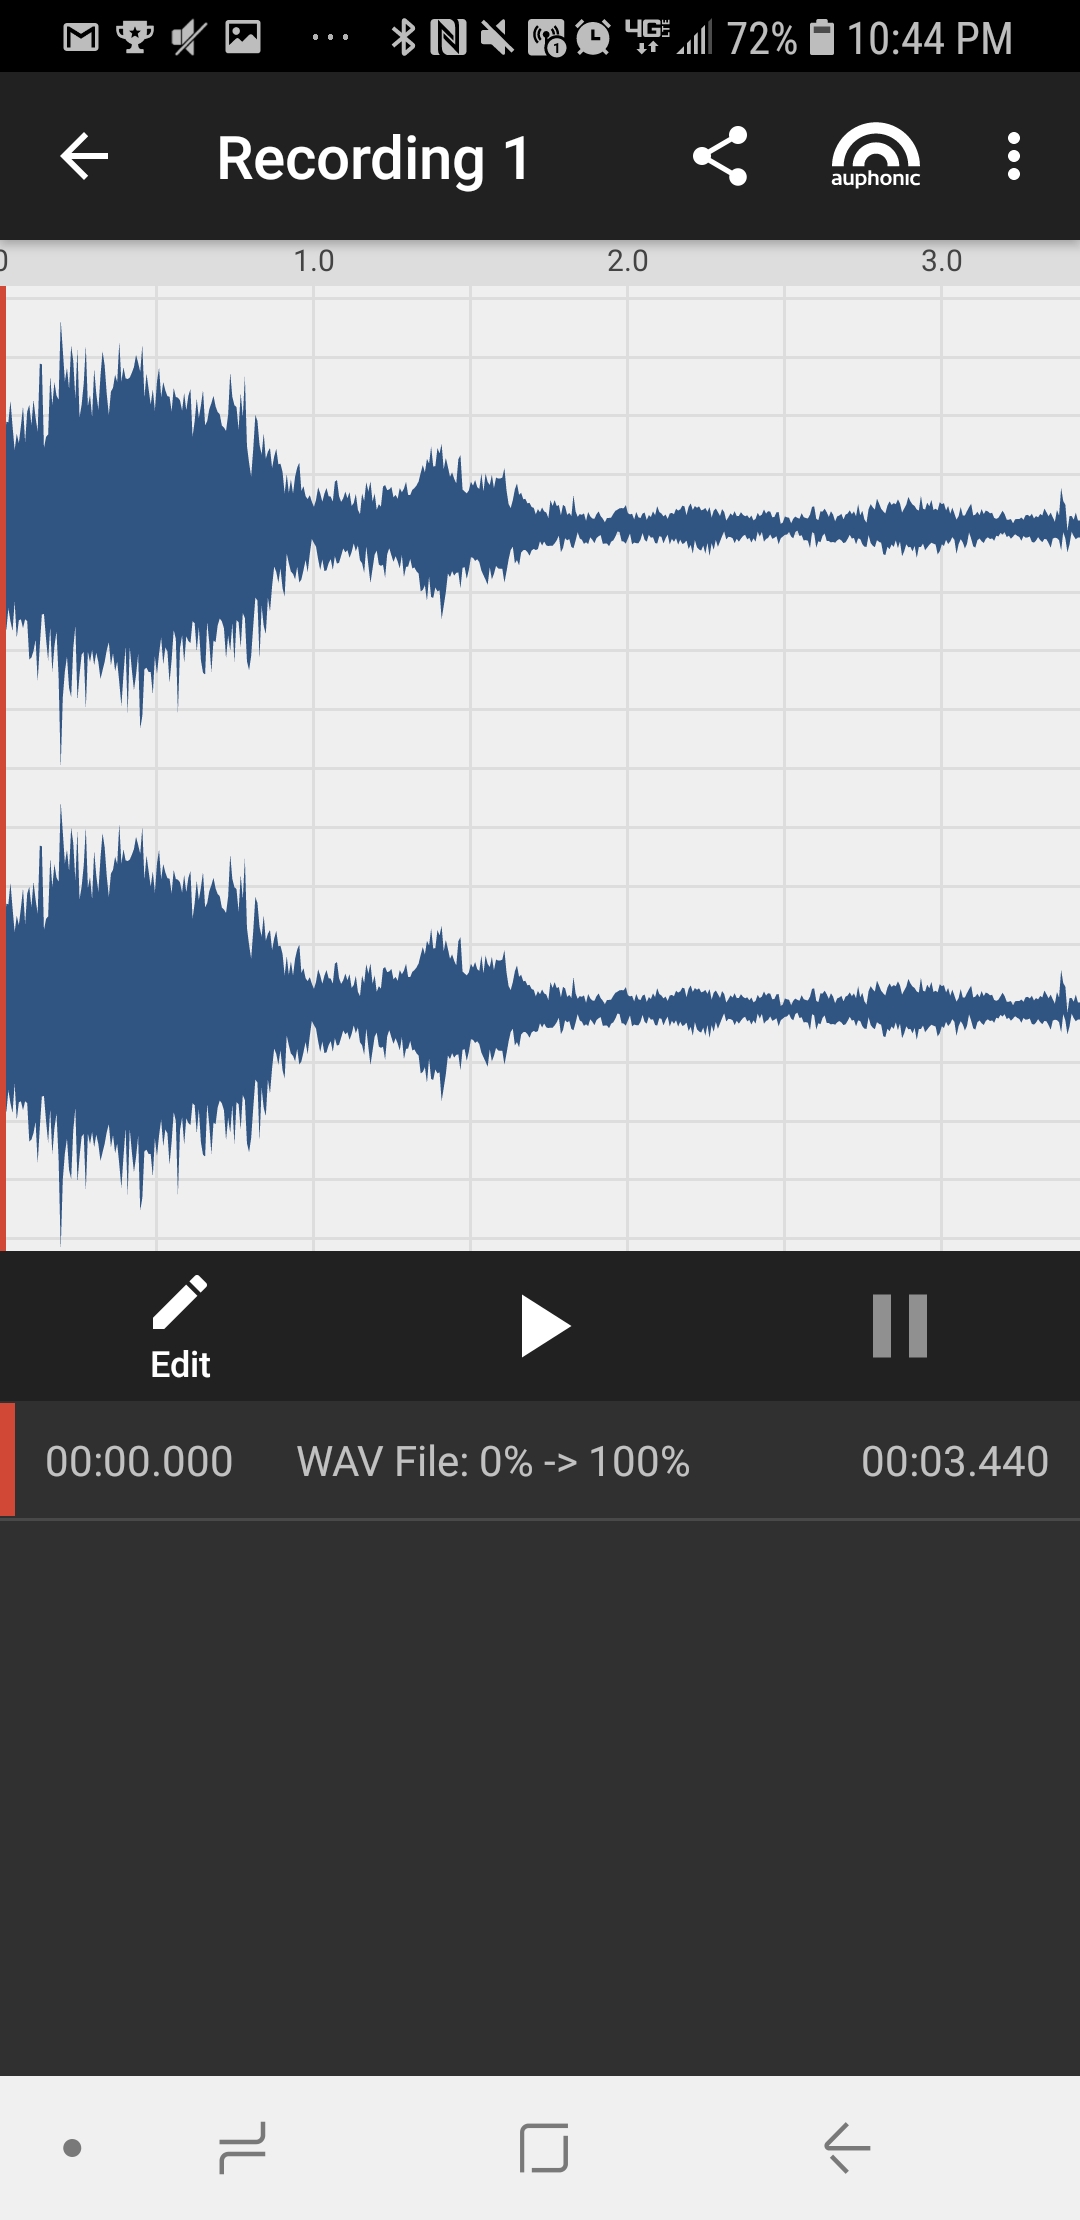 You can edit the wave file in app